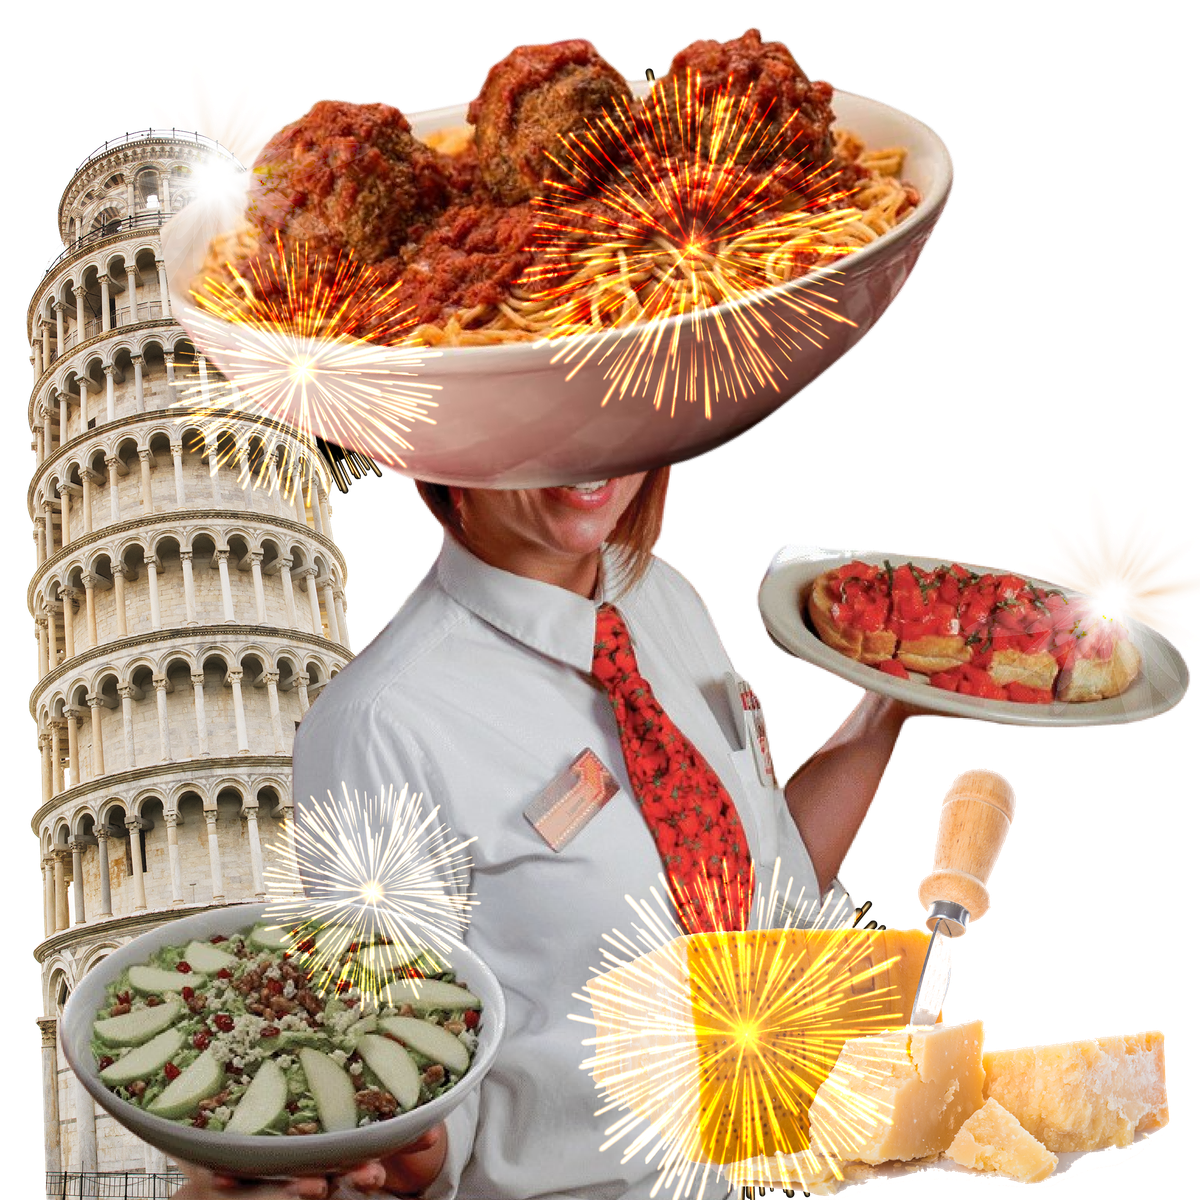 Leaning Tower of Pisa next to a waitress, blocks of cheese, apple salad, and spaghetti and meatballs.